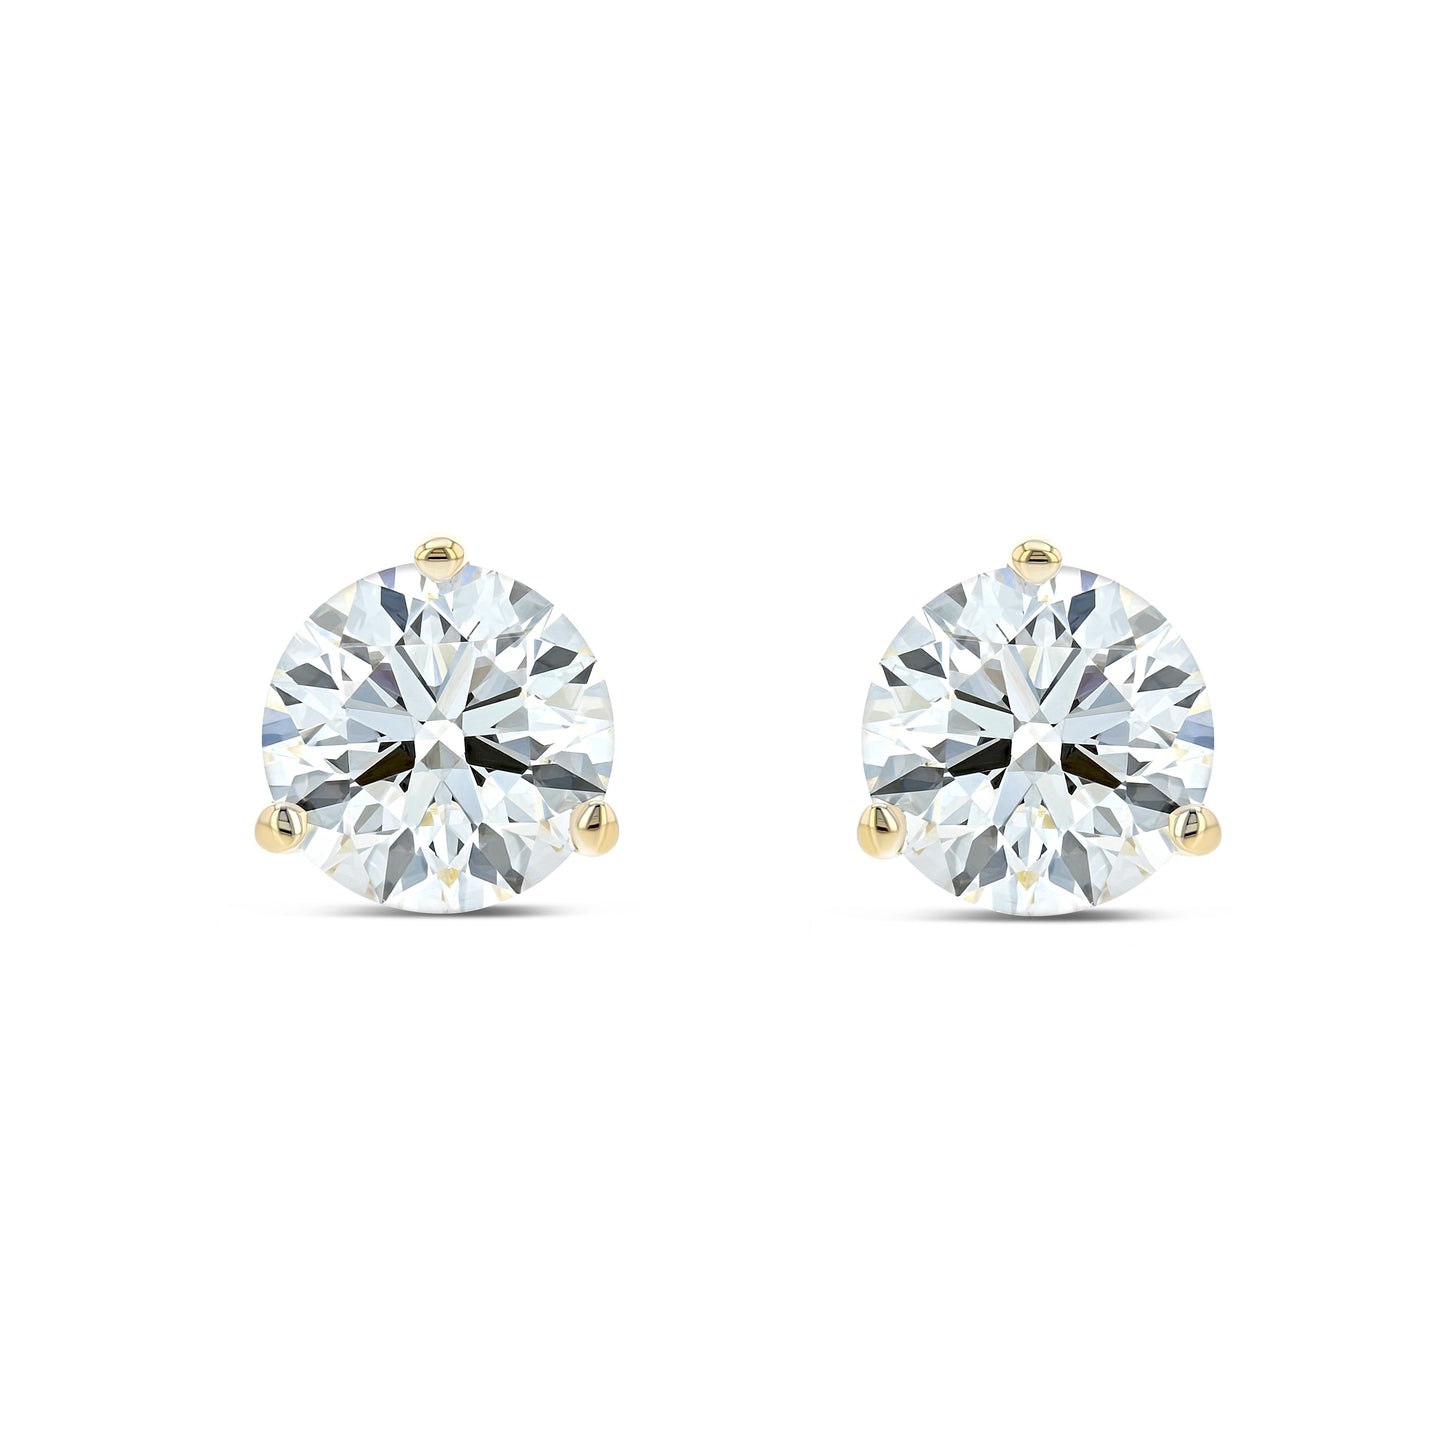 18k Yellow Gold 3-prong Martini Round Diamond Stud Earrings 1ctw (5.0mm Ea), G Color, Si3 Clarity